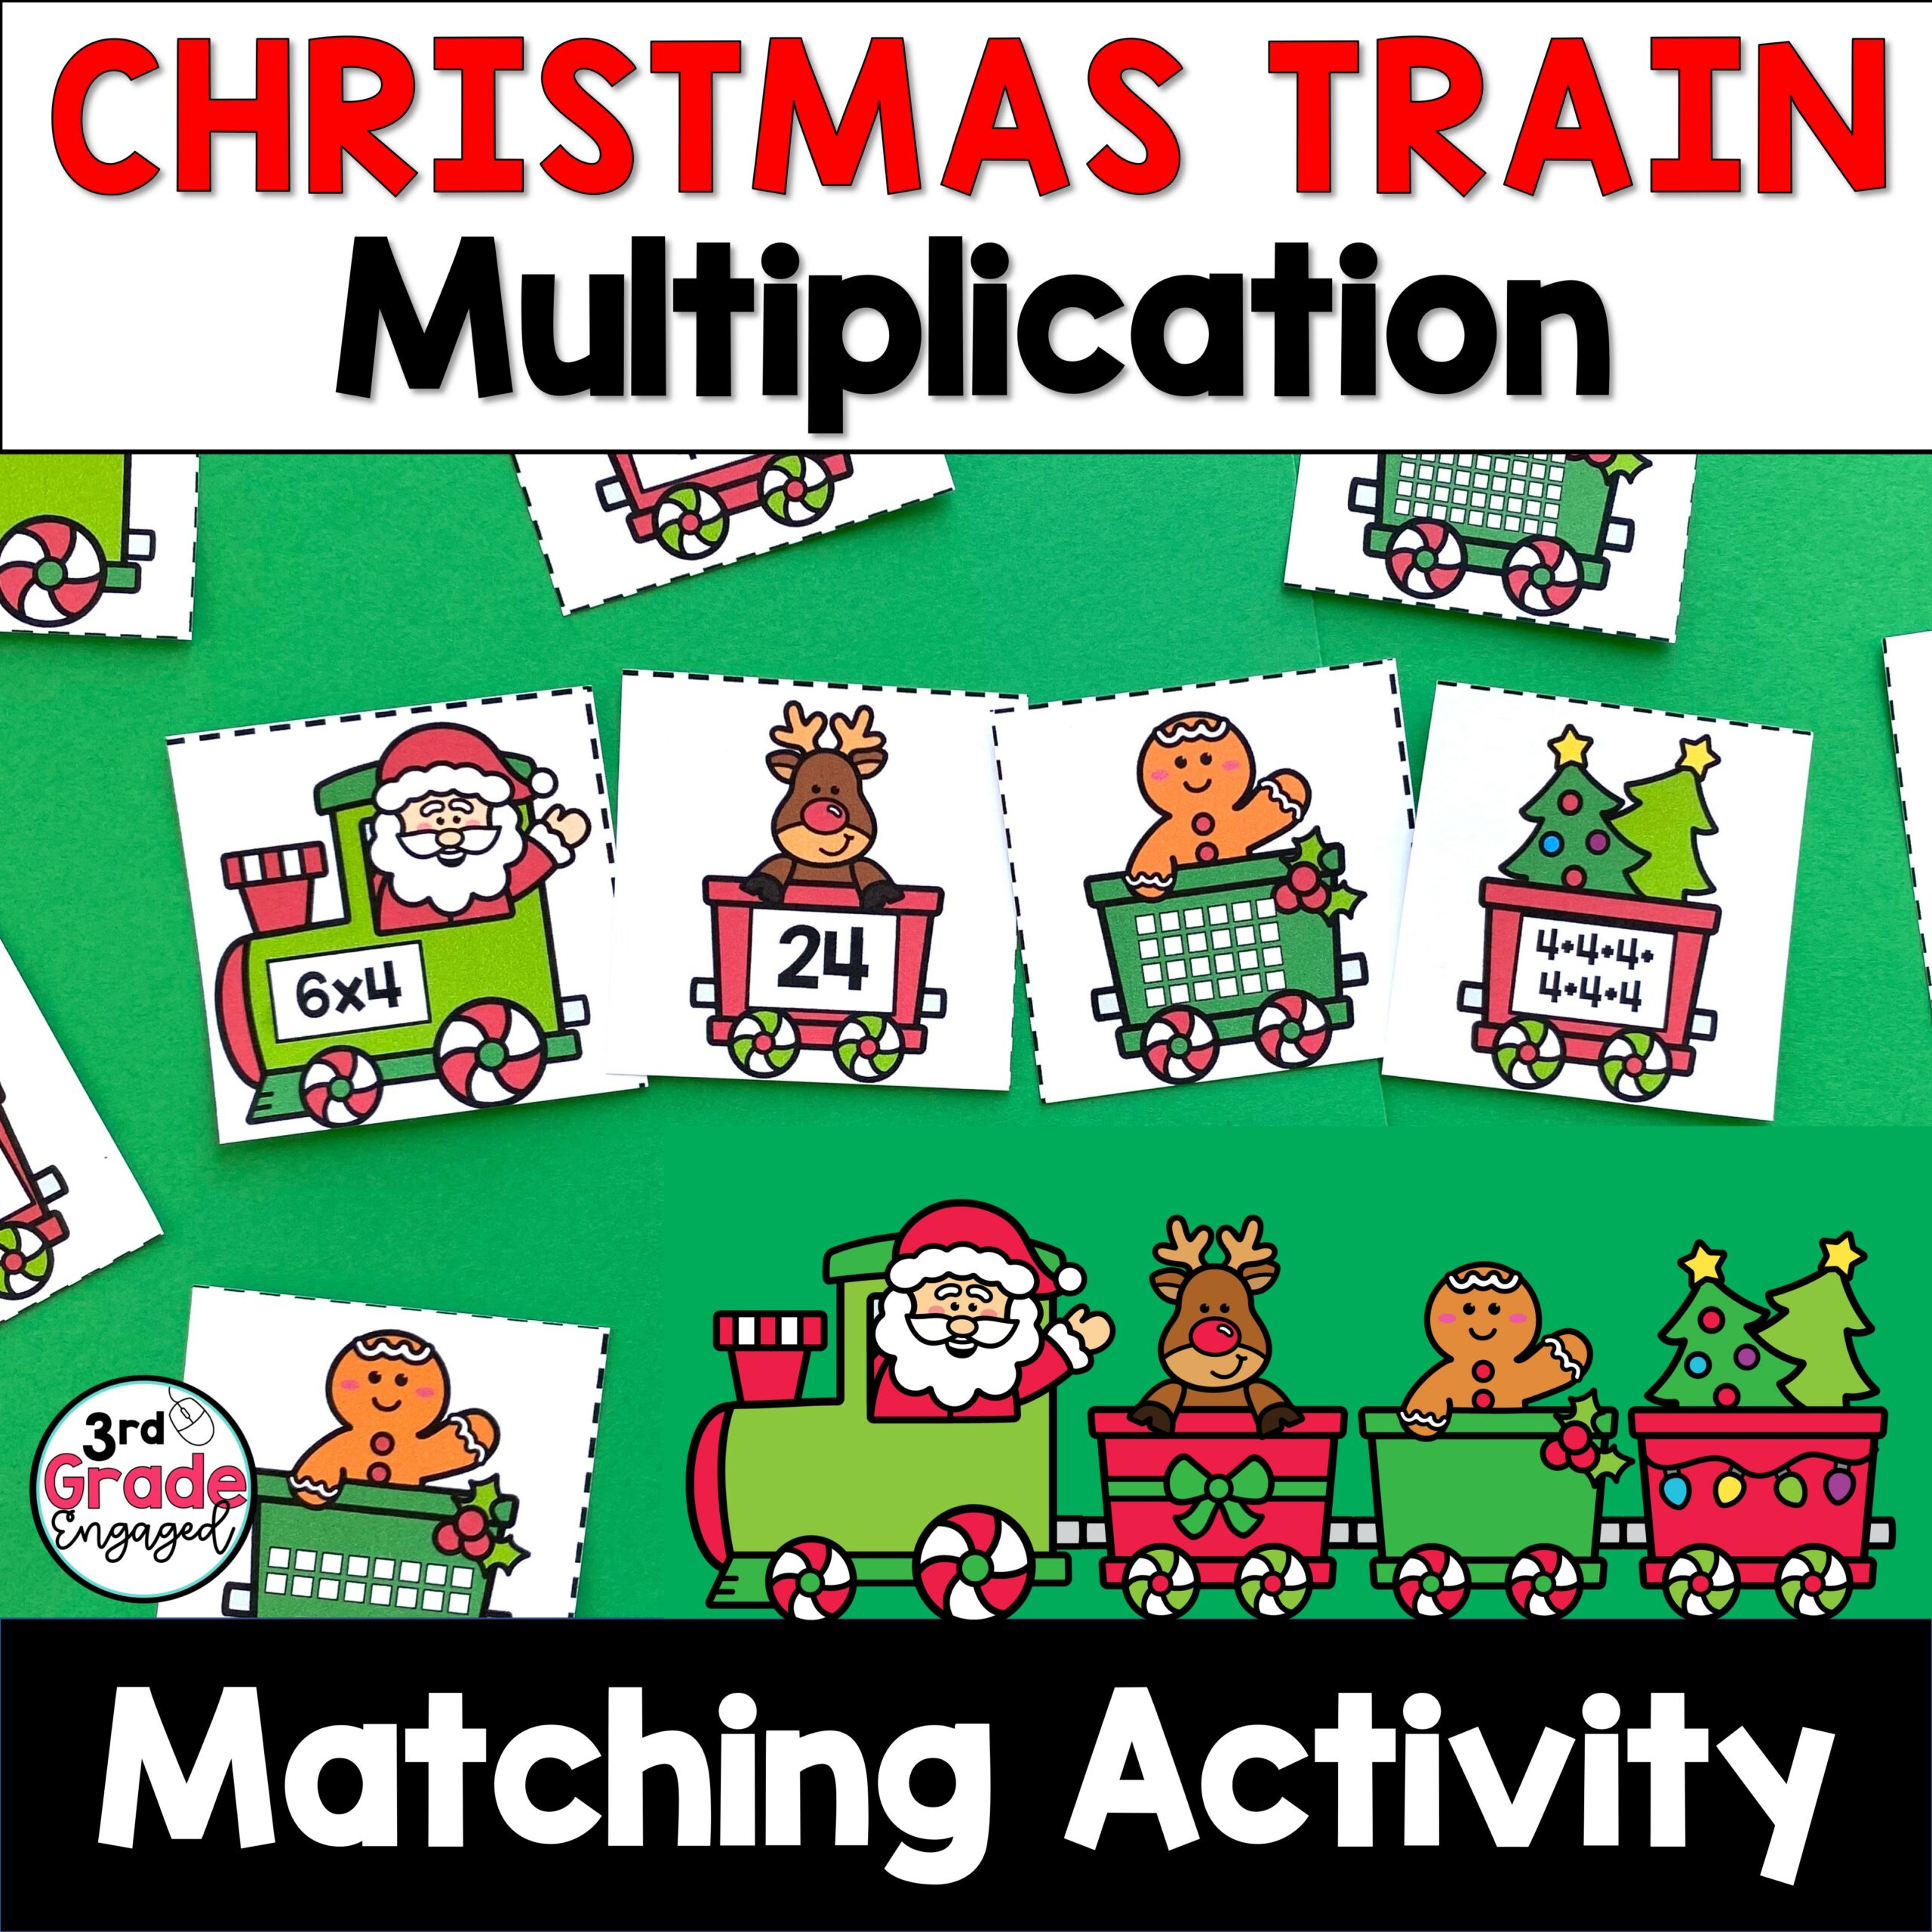 Christmas Multiplication Train Math Matching Activity's featured image